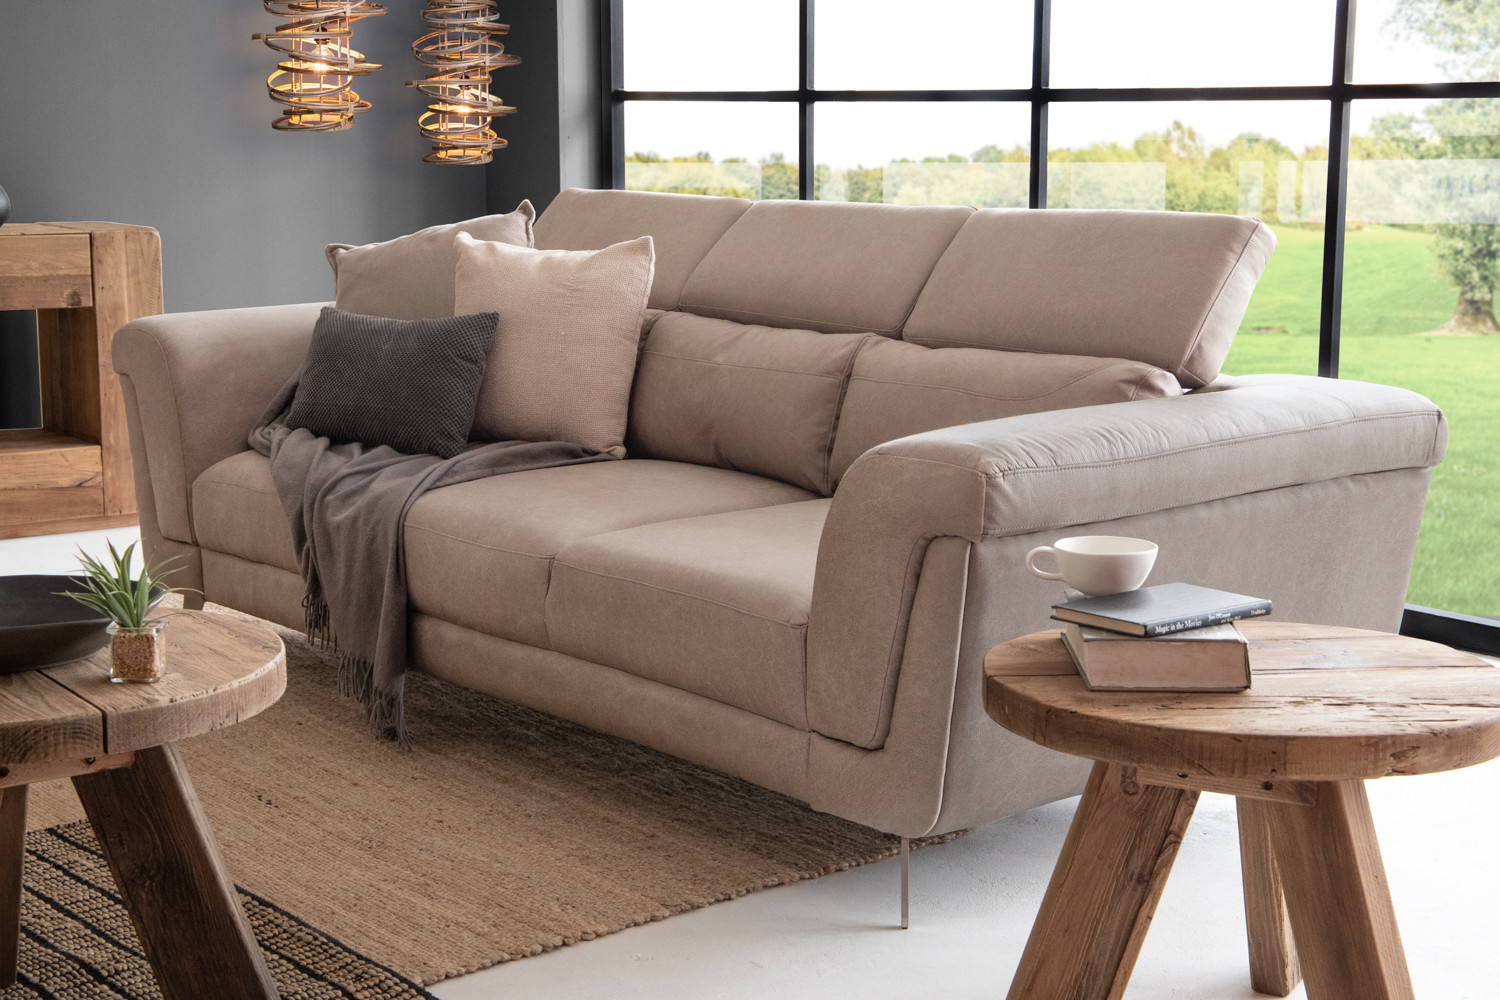 Laurence 3 Seater Couch - Sandstone